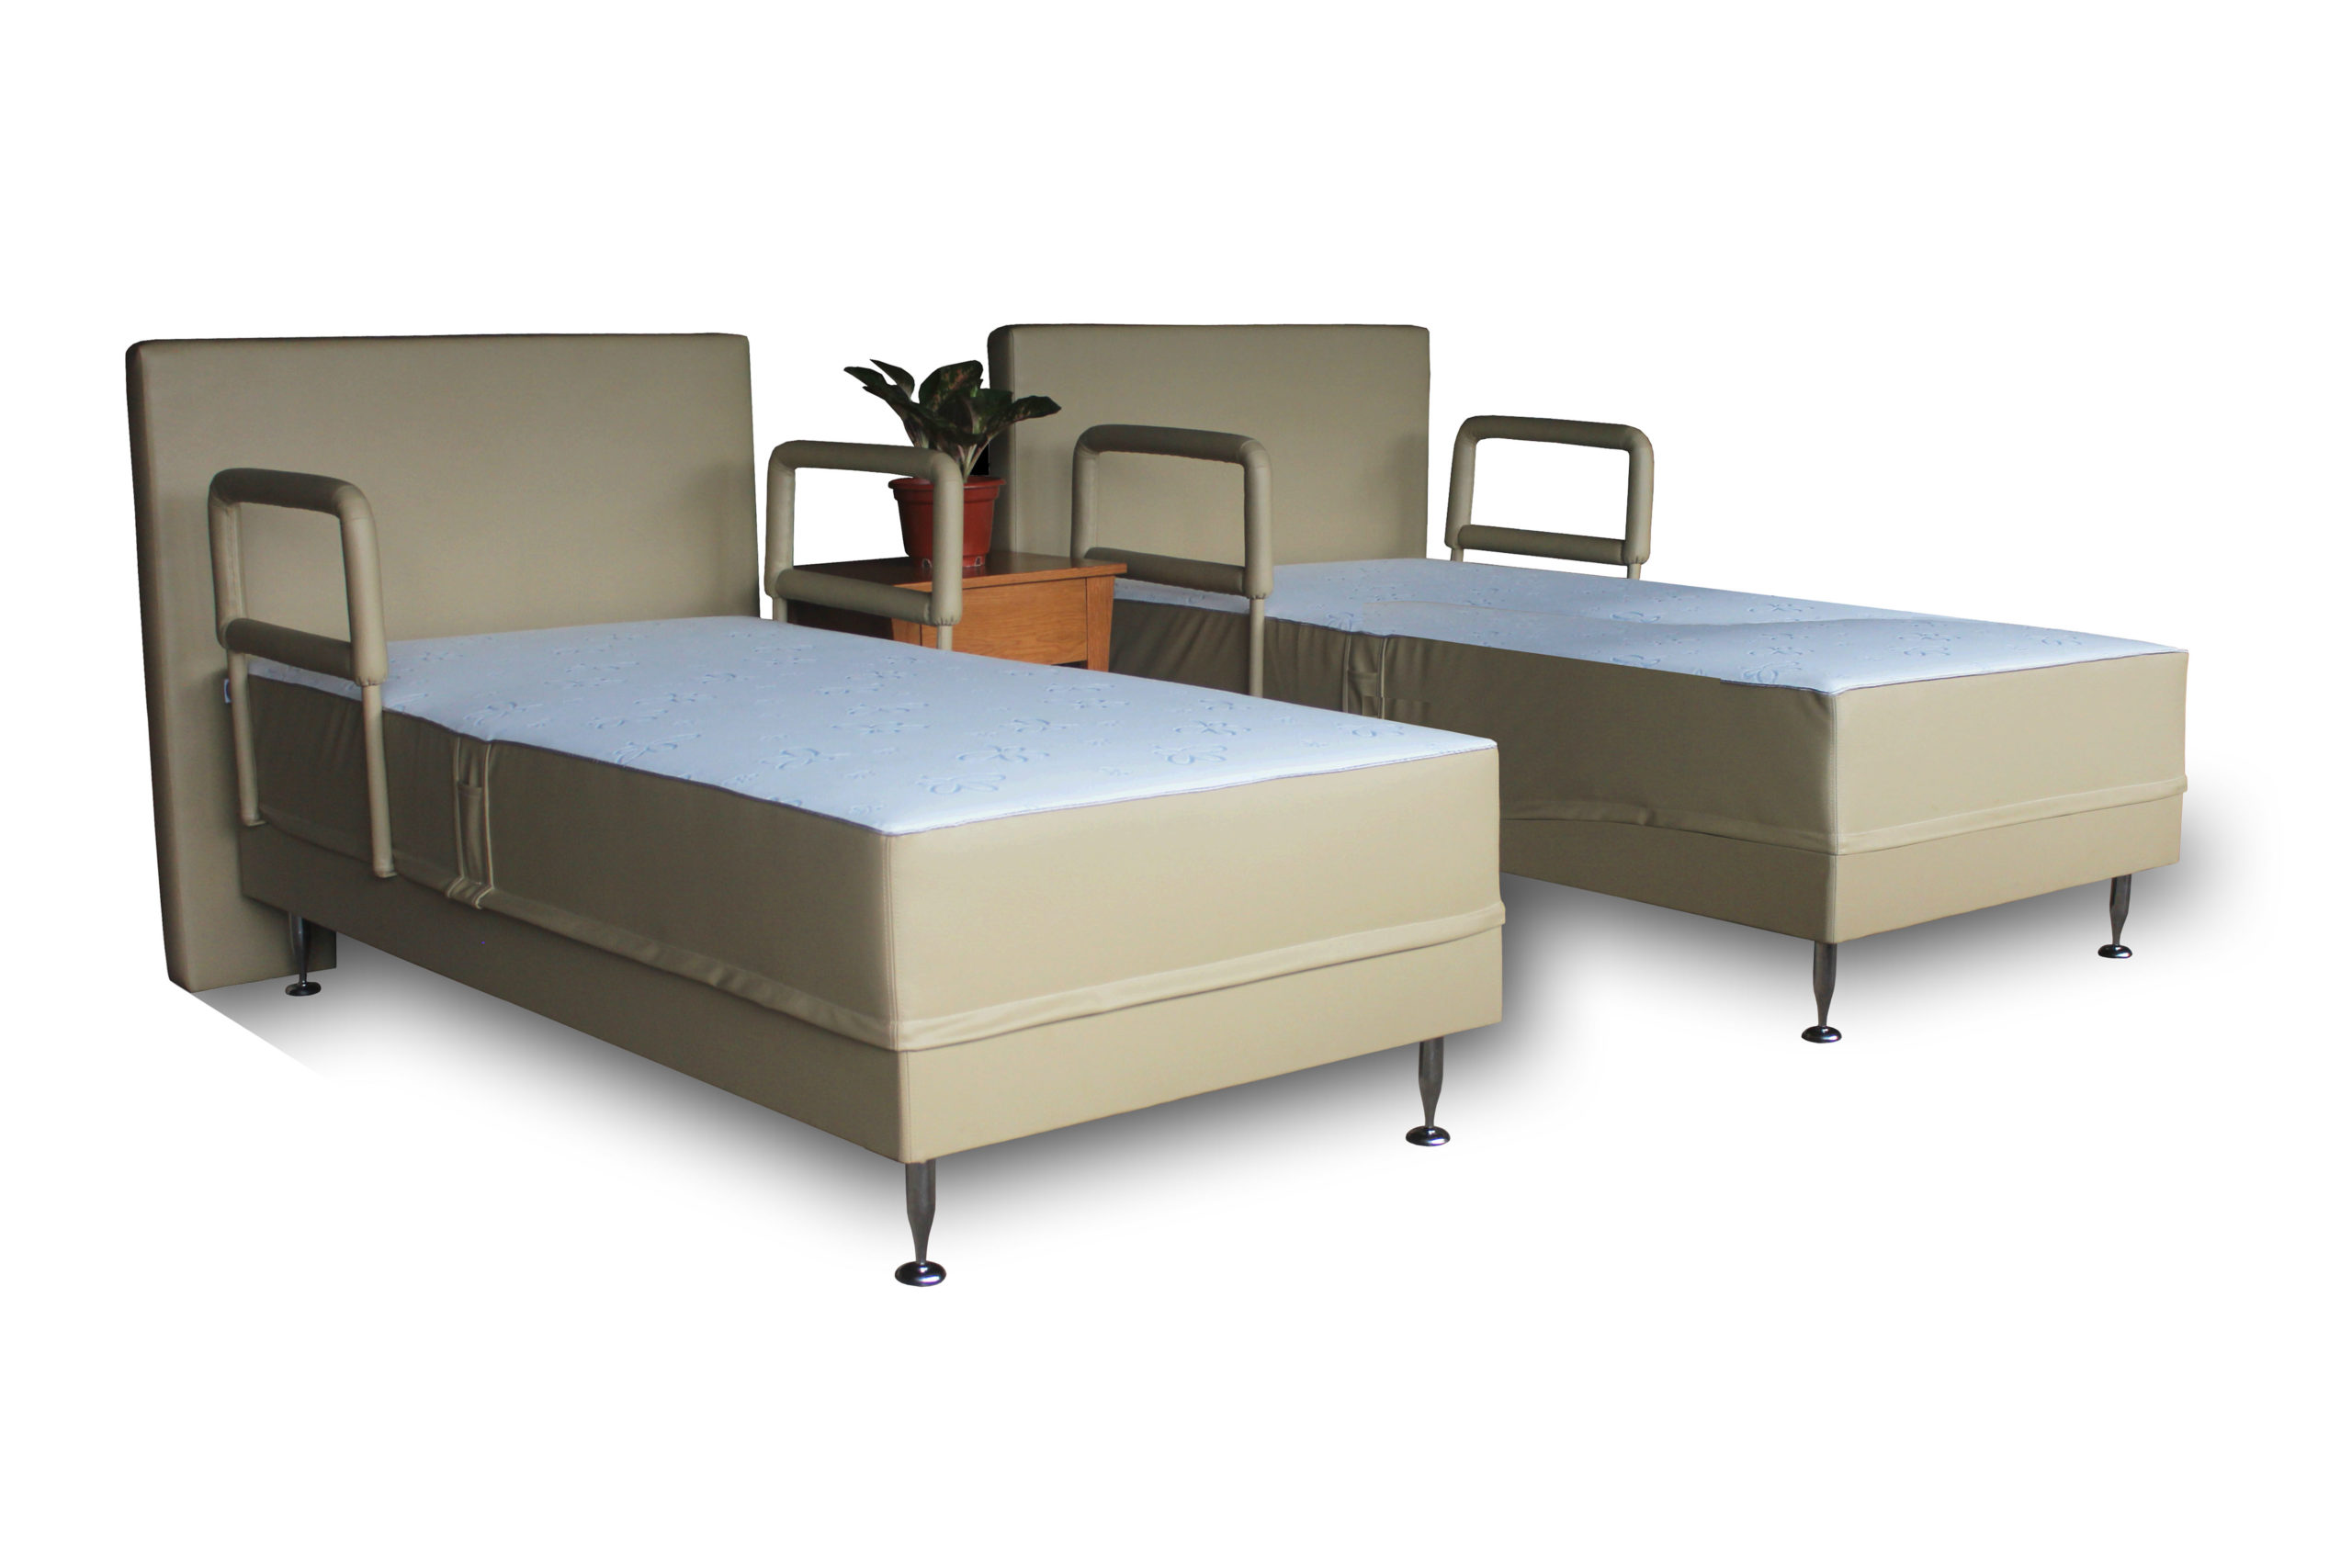 Twin Single Bed With Side Rails, Twin Bed With Side Rails